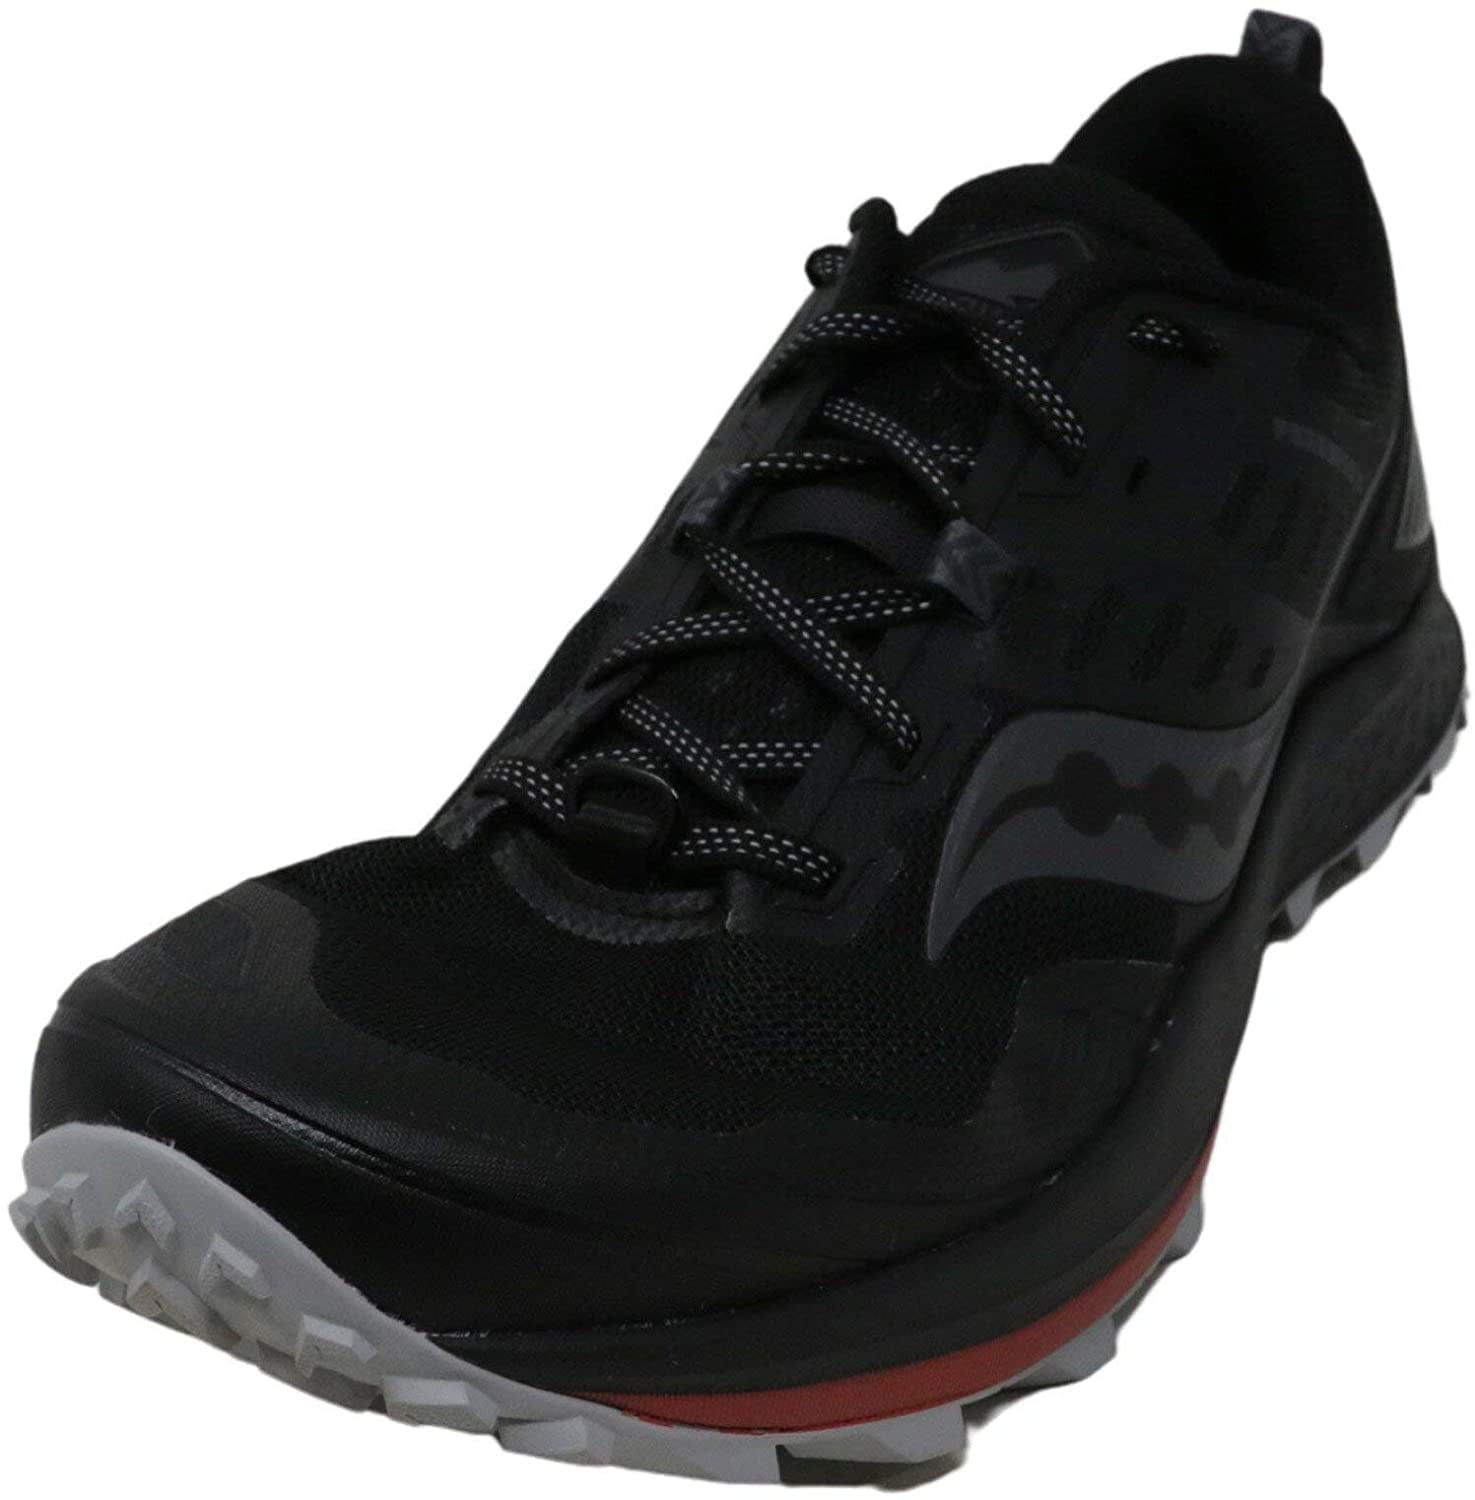 Black/Red Saucony Peregrine 10 Wide Mens Trail Running Shoes 